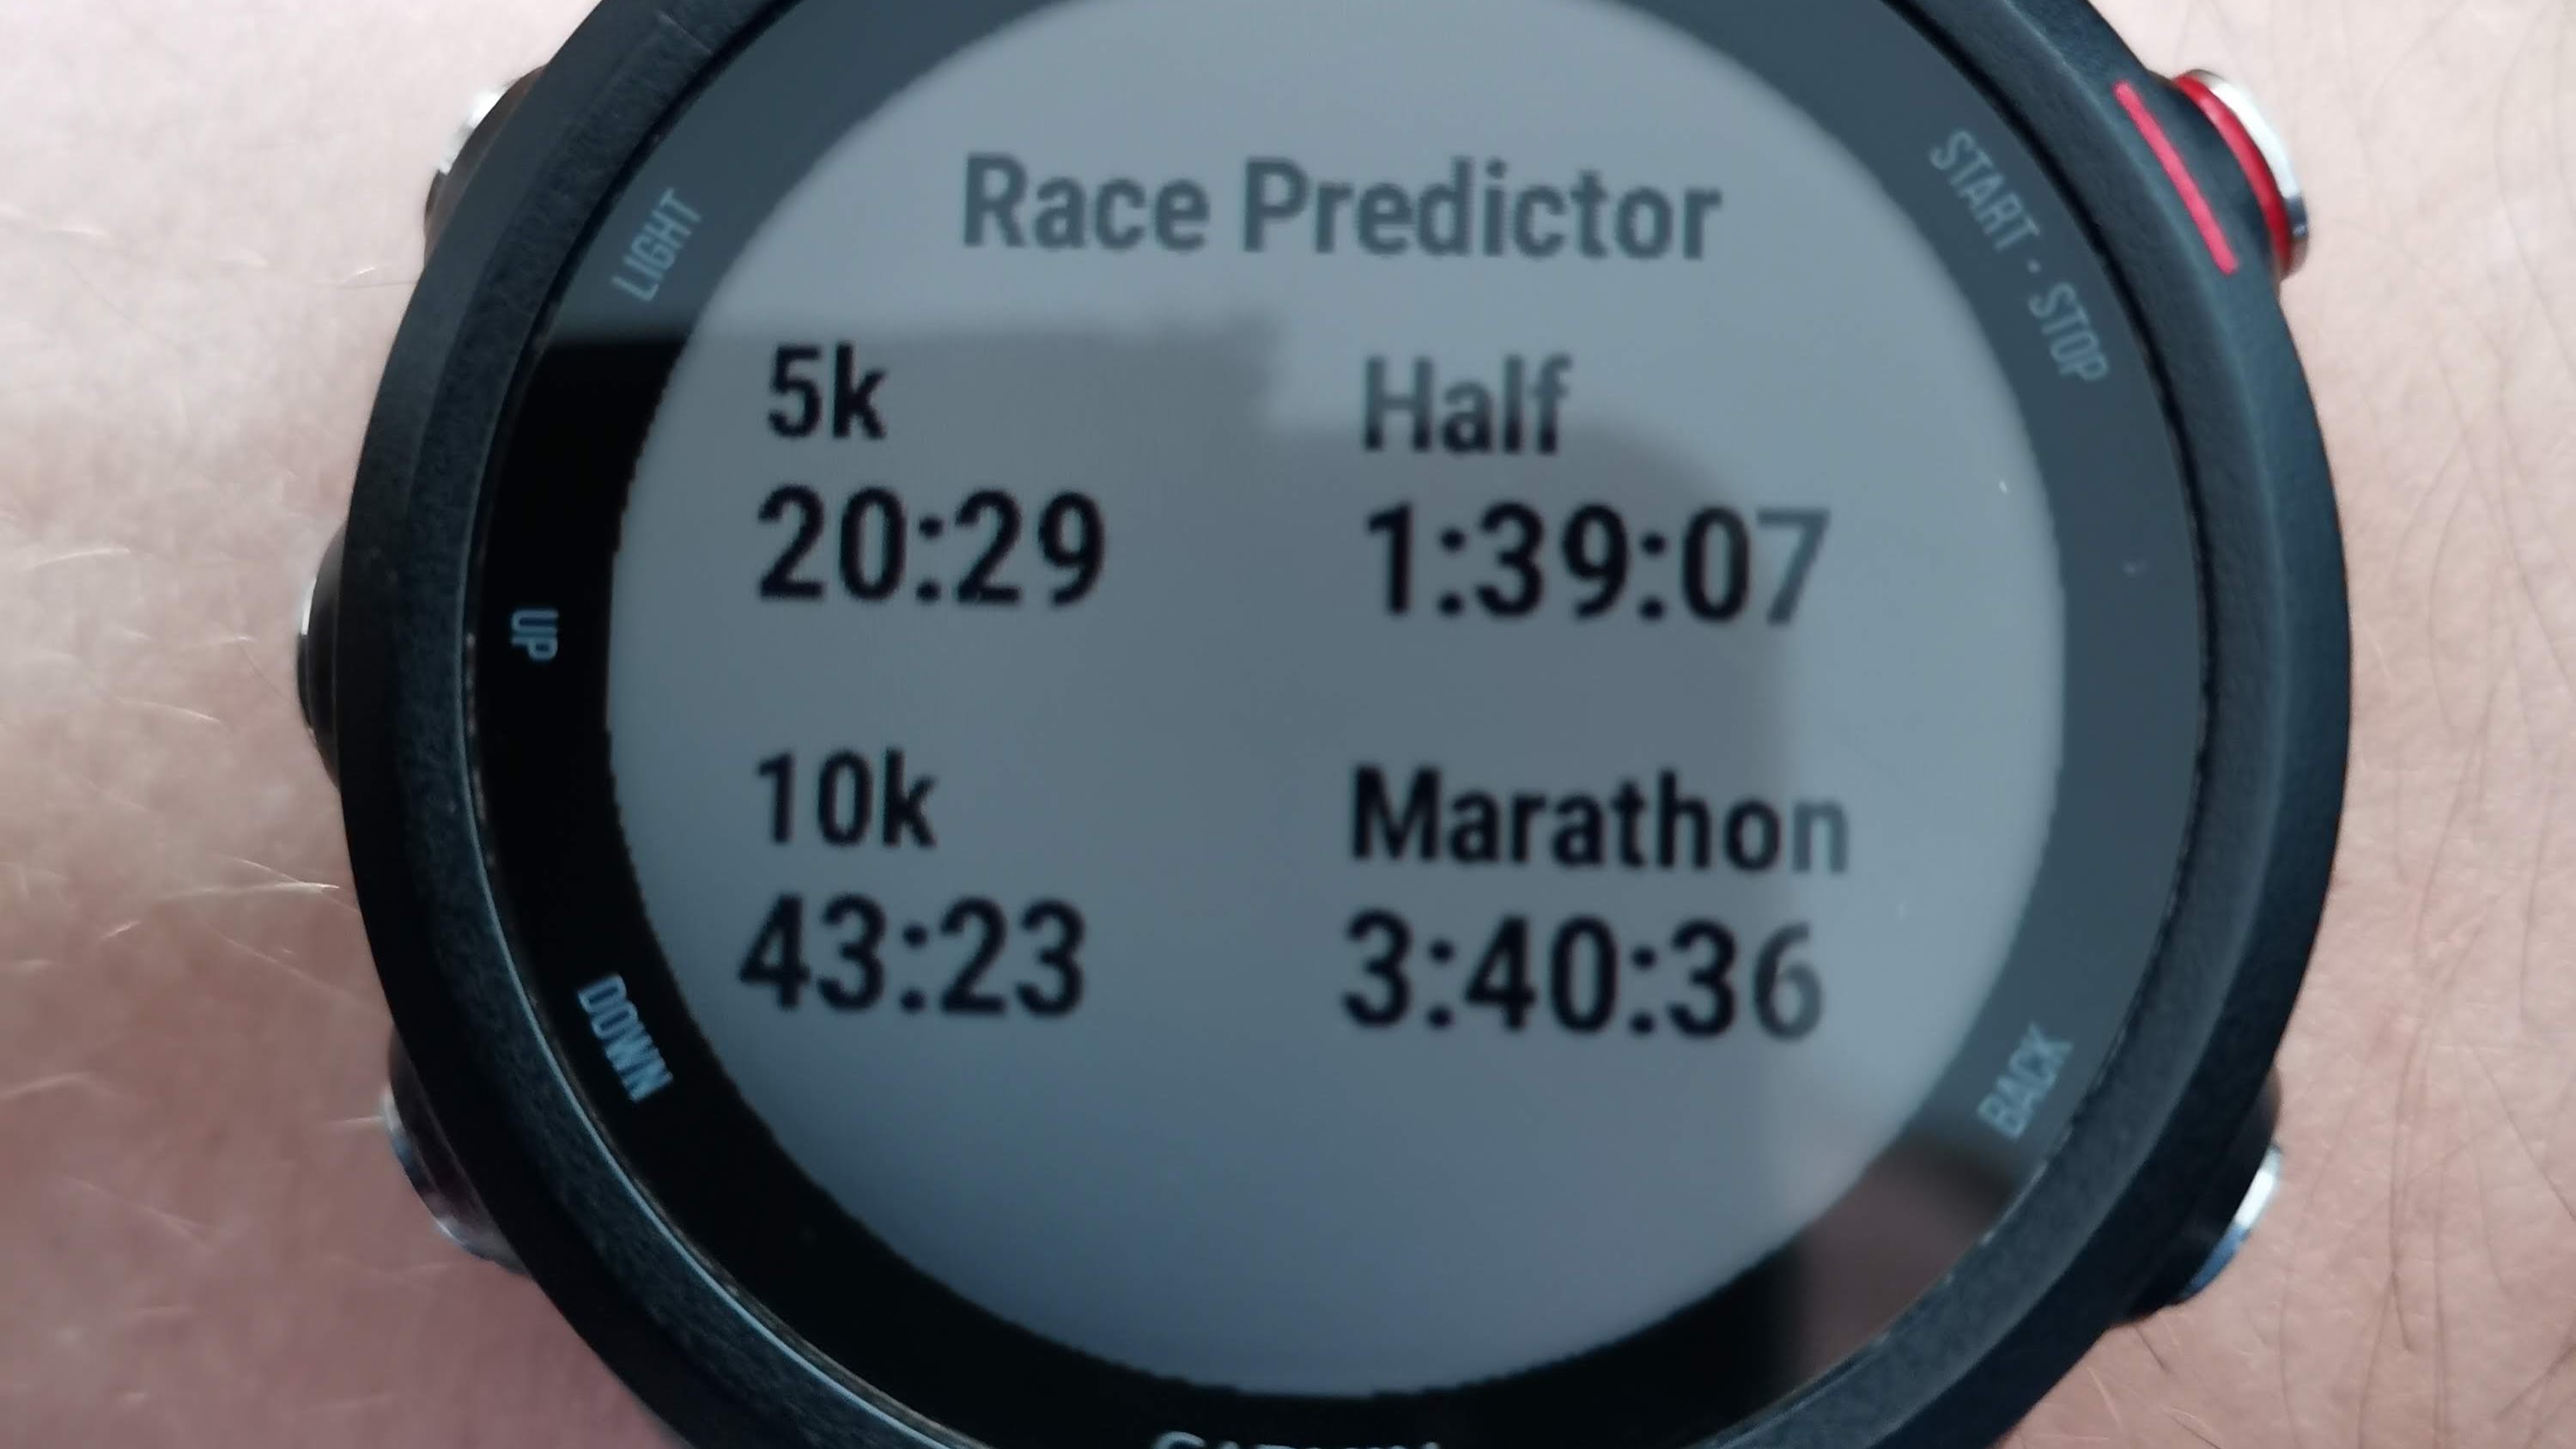 A photo of my Garmin watch race pridictor showing 20:29 for 5K.